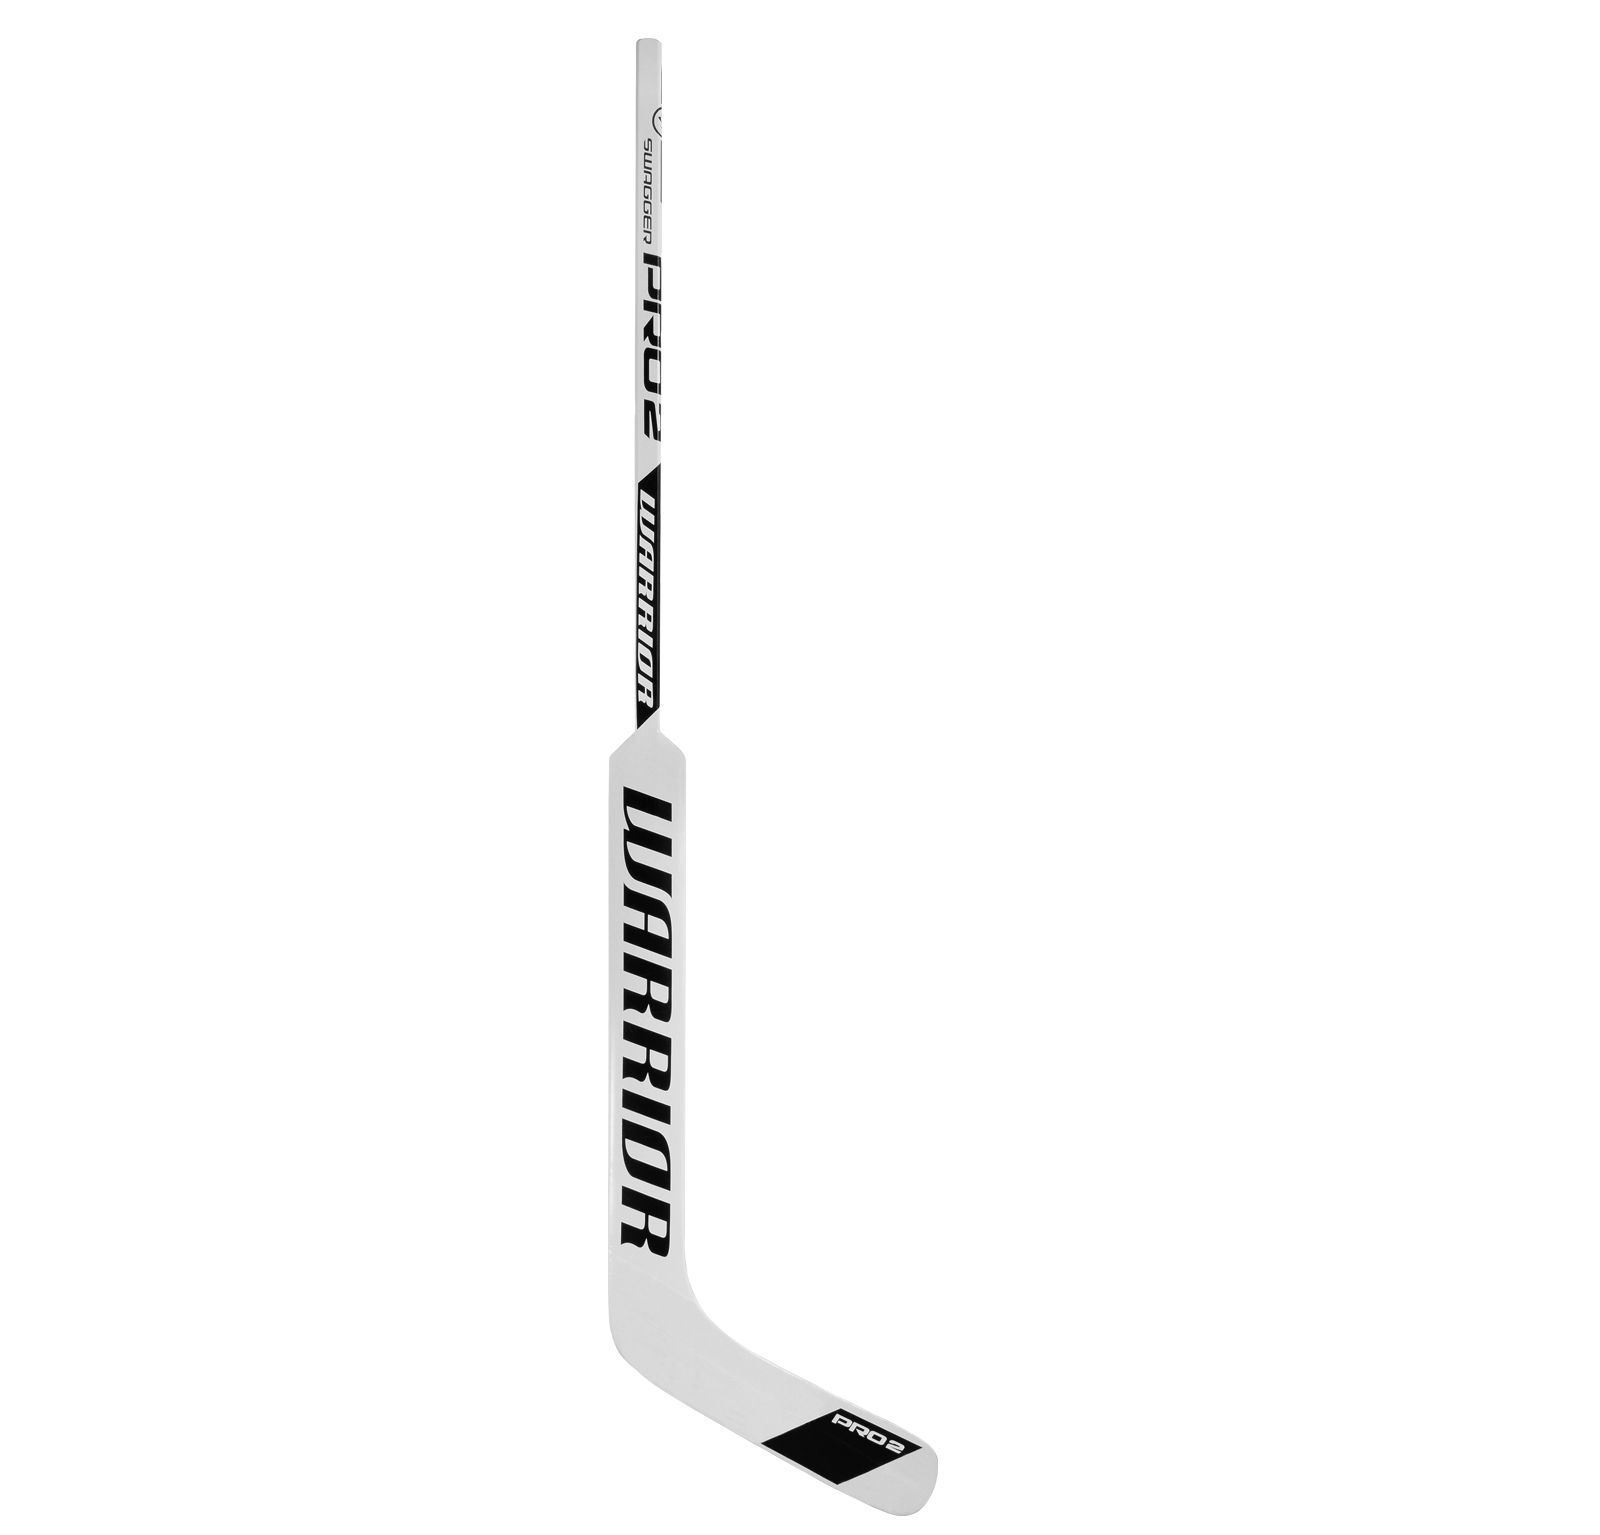 Swagger Pro 2 - SR Left, White with Black image number 0